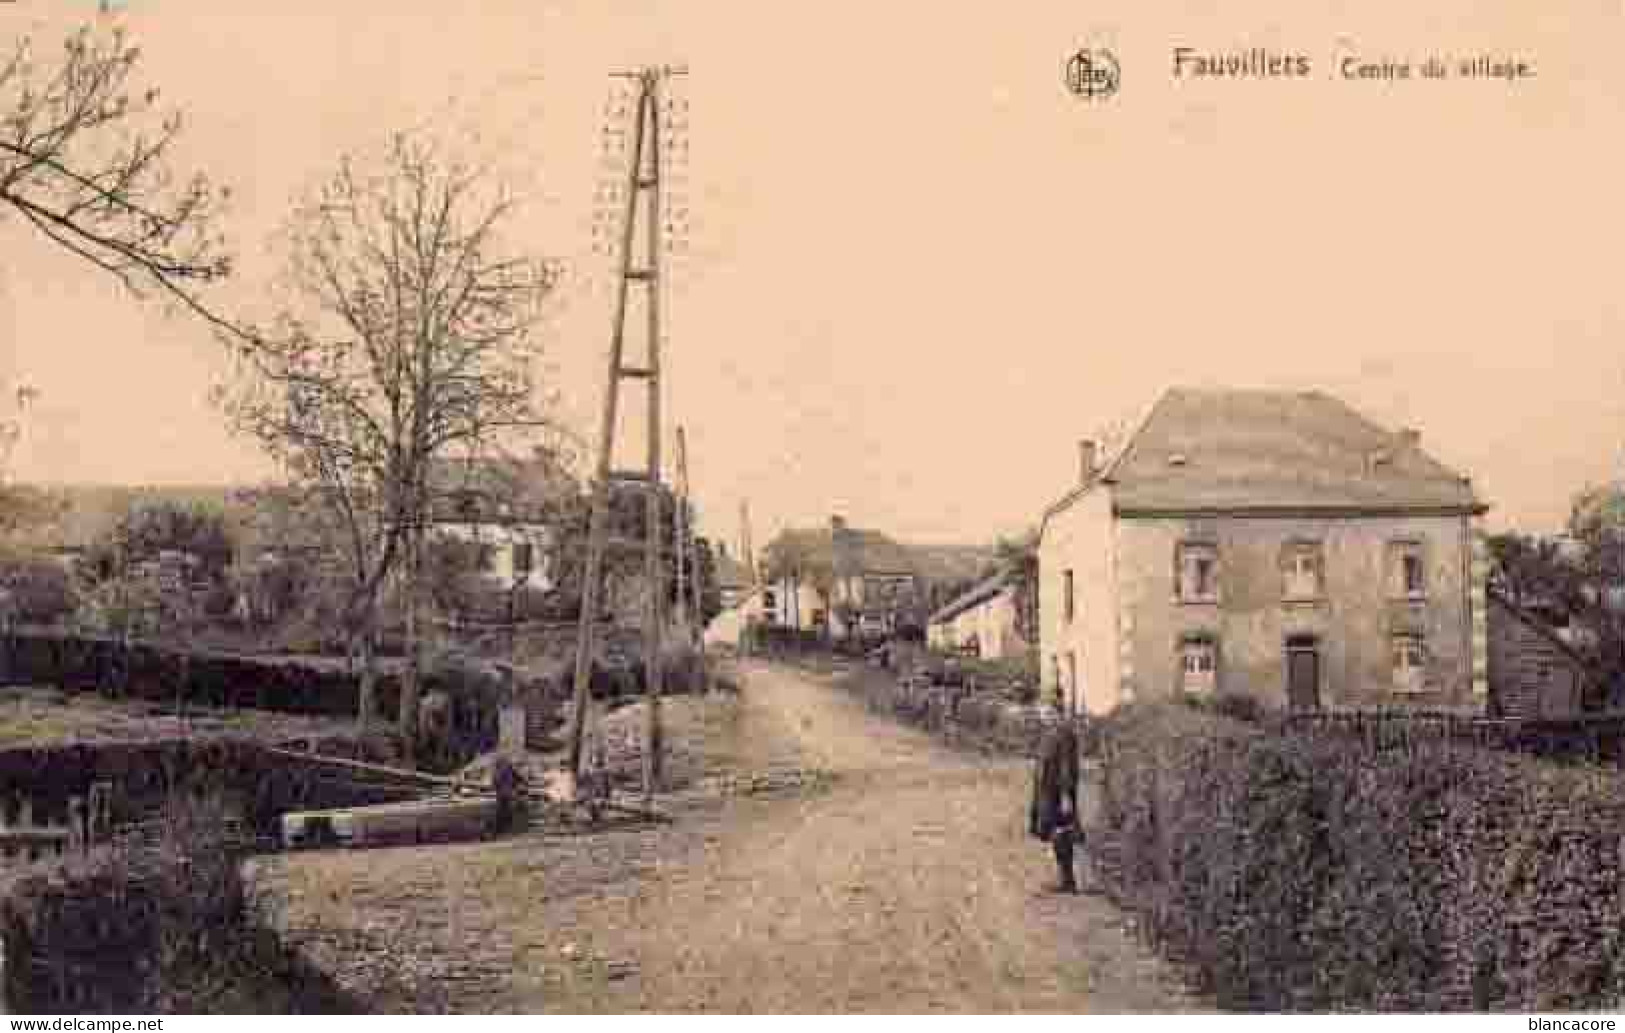 Fauvillers  1927 - Fauvillers